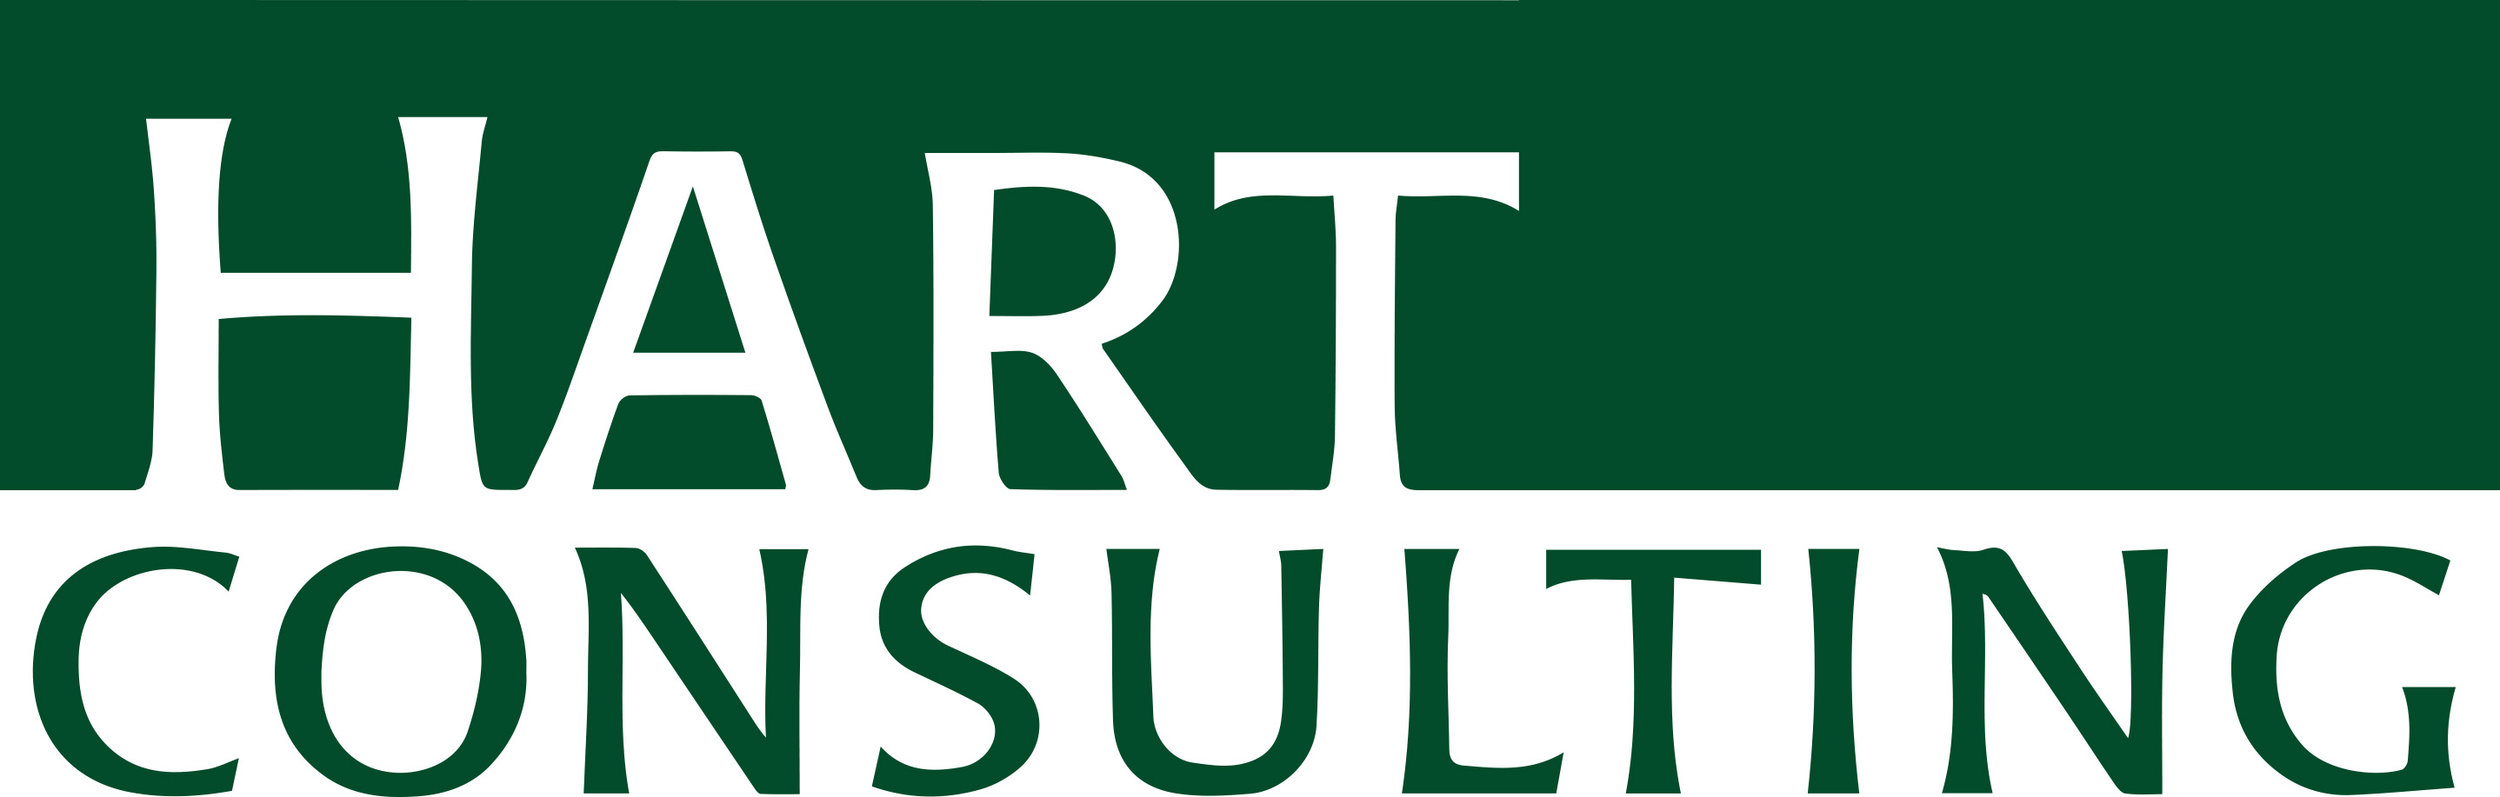 Hart Consulting